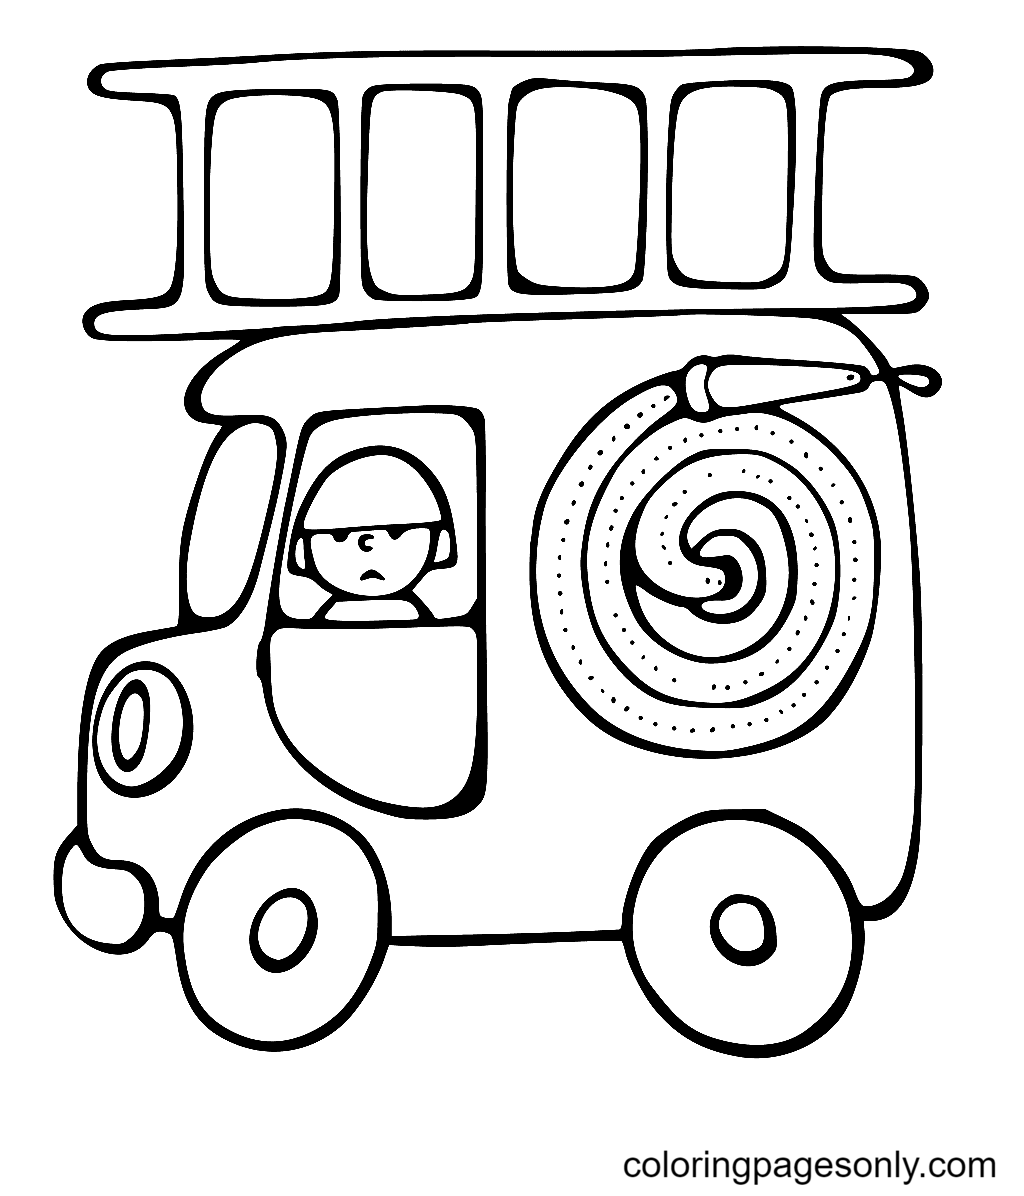 Cartoon Fire Truck Coloring Page